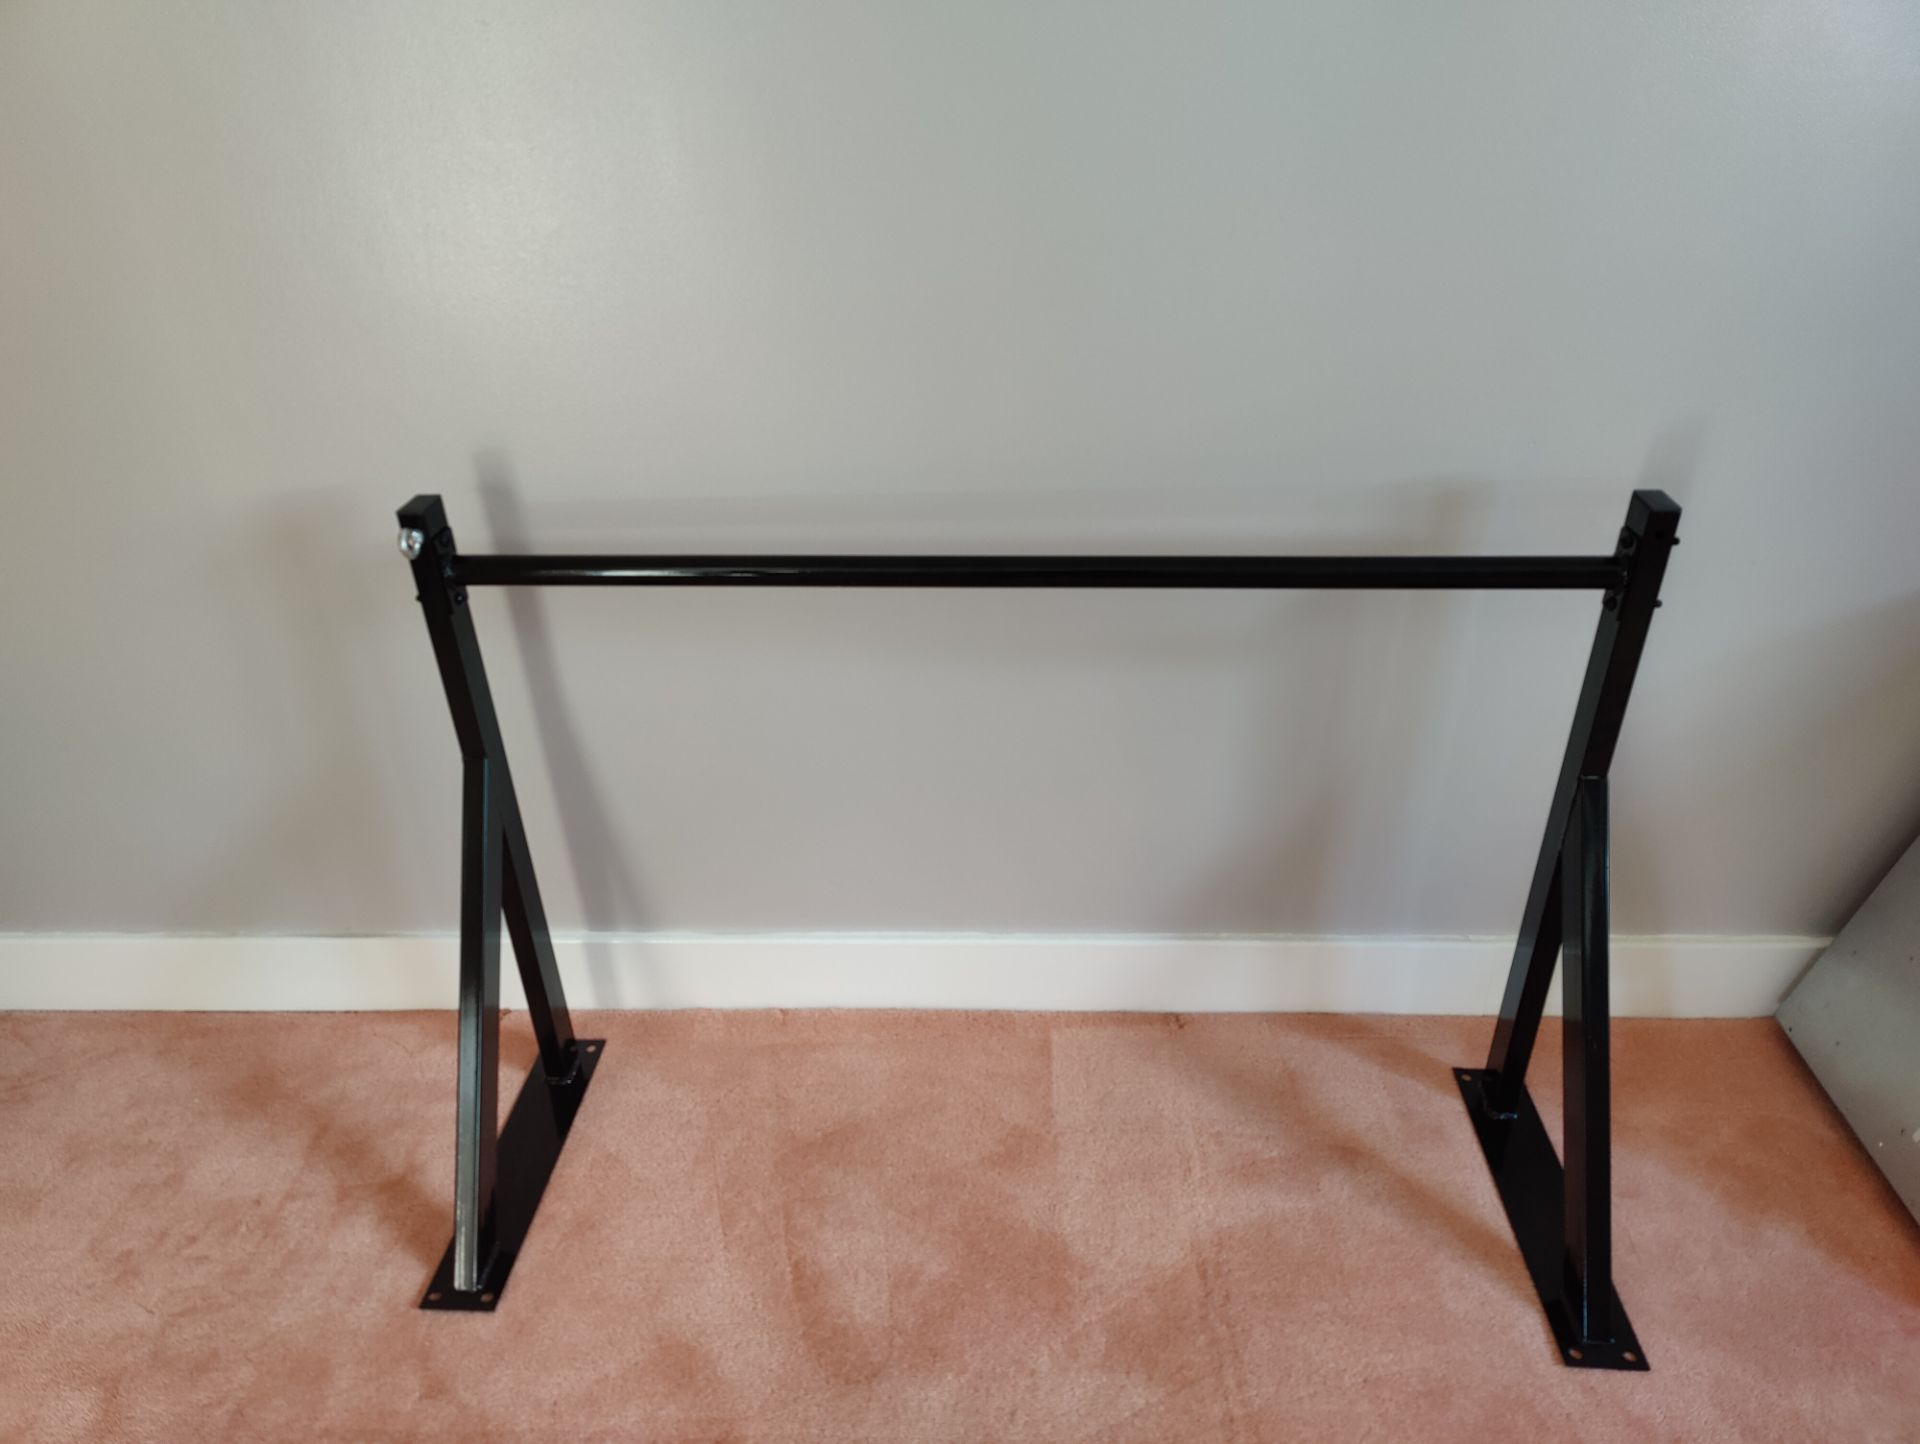 Commercial Gym Wall Mounted Steel Made Pull/Push Chin Up Bar - Bild 2 aus 3